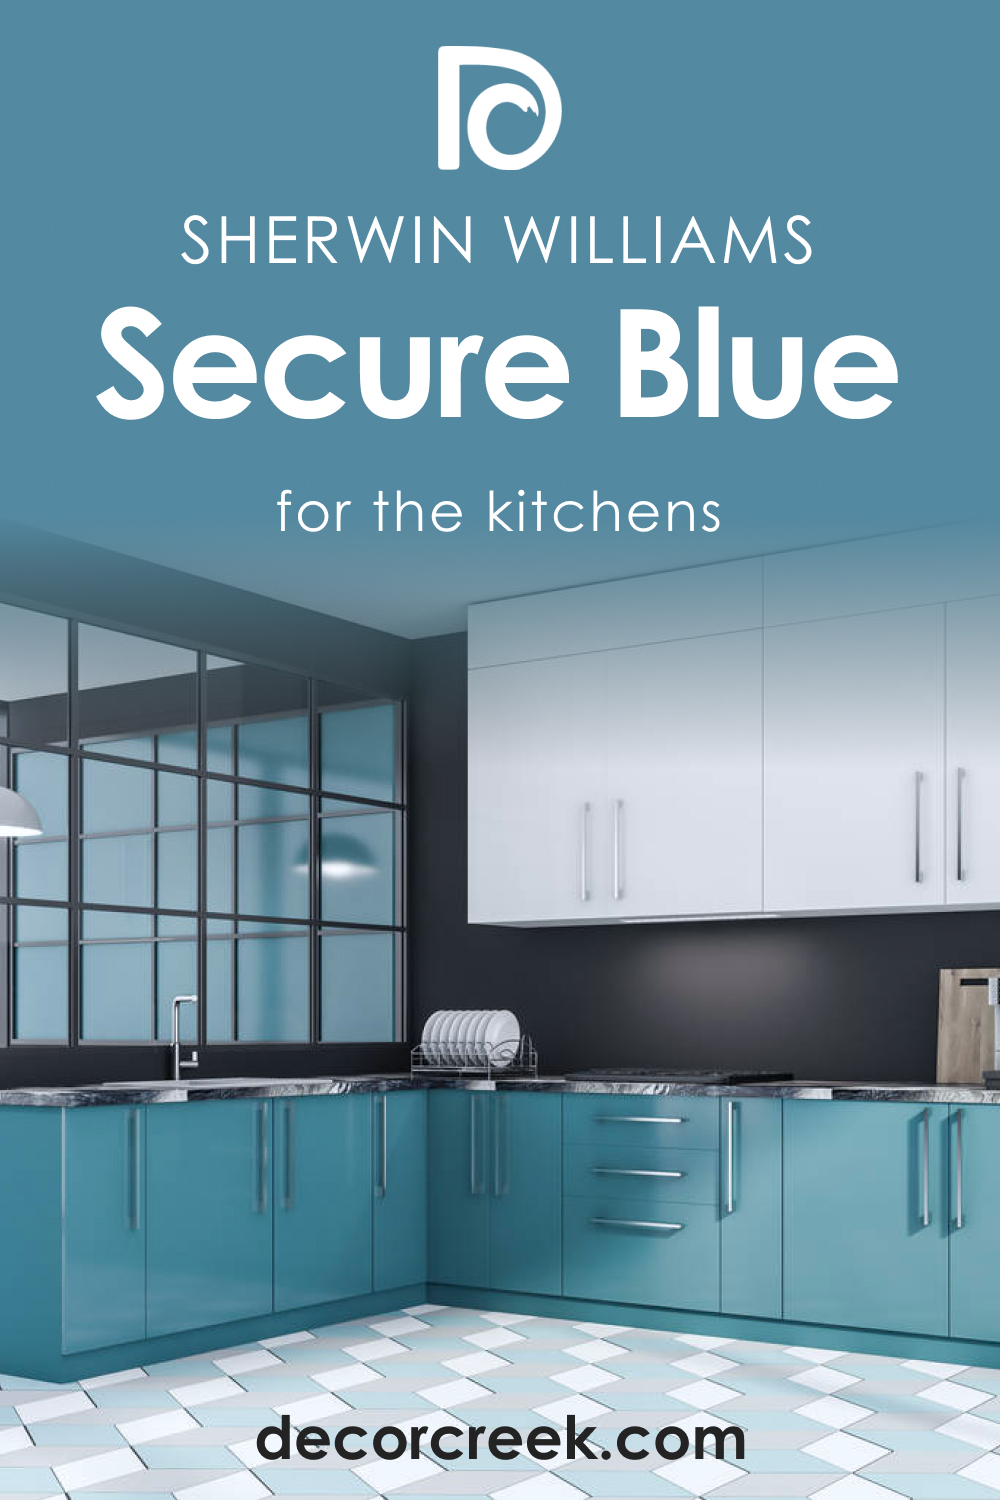 How to Use Secure Blue SW 6508 for the Kitchen?